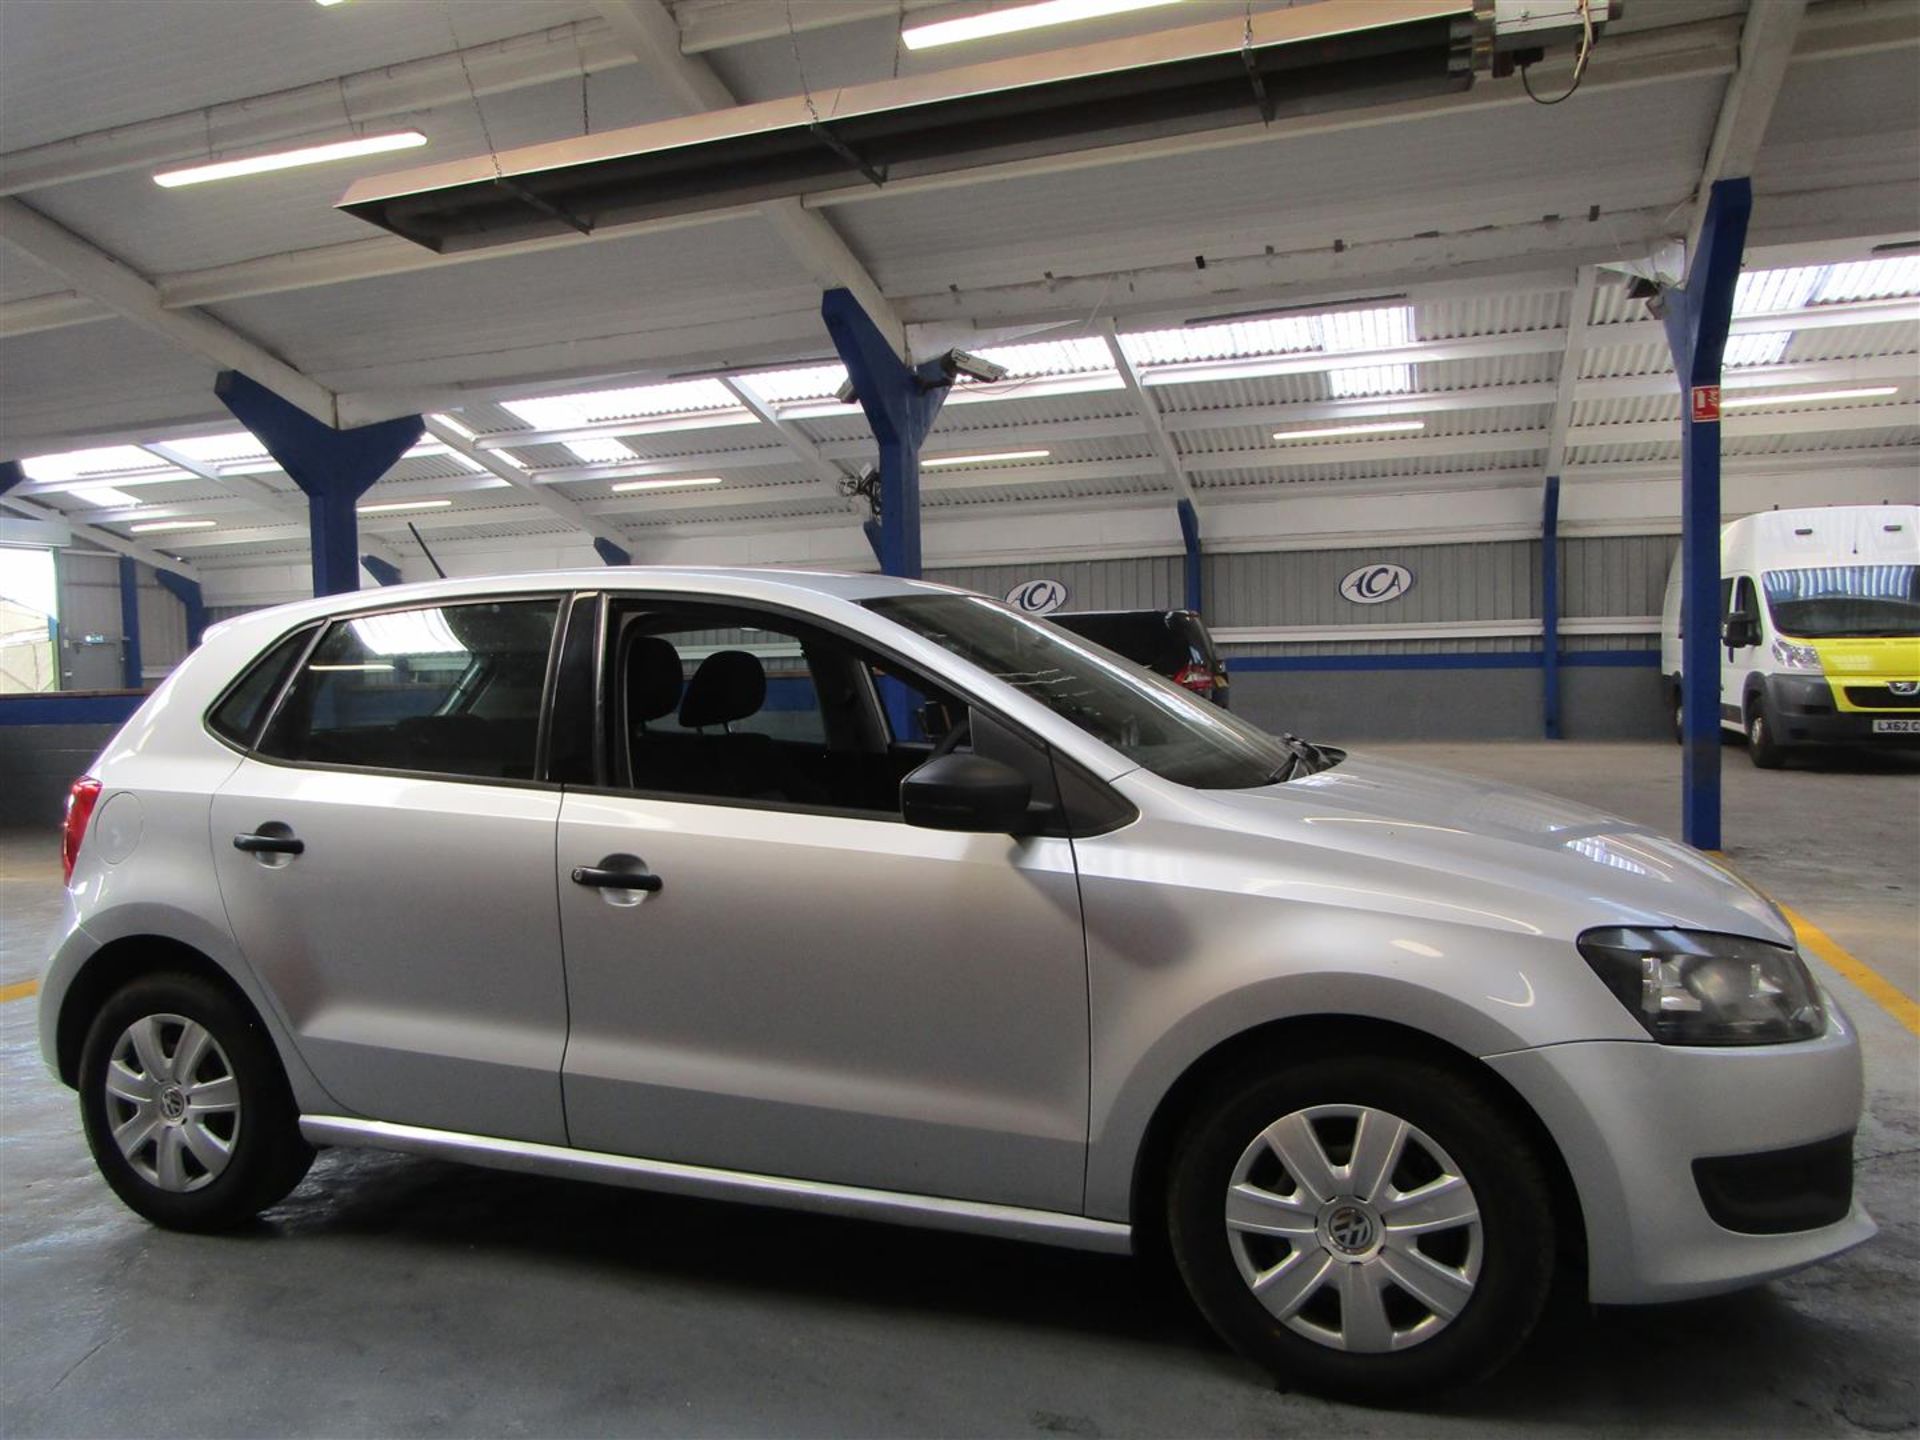 59 10 VW Polo S 60 - Image 24 of 29